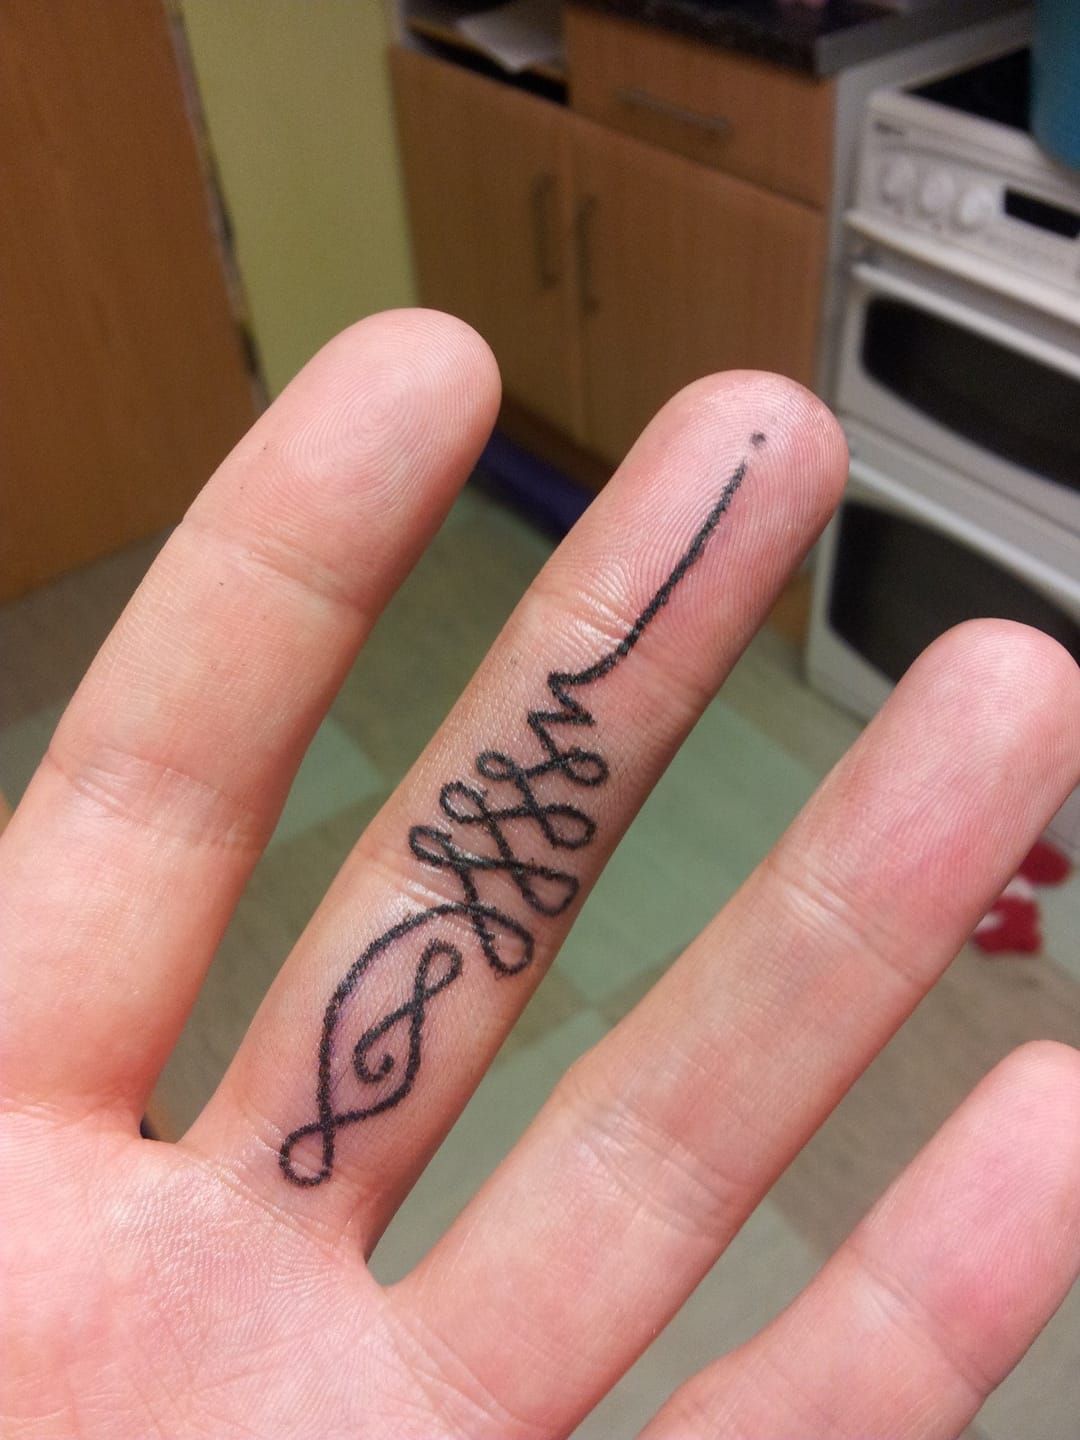 20 Of The Best Stick And Poke Tattoos For Men in 2023  FashionBeans